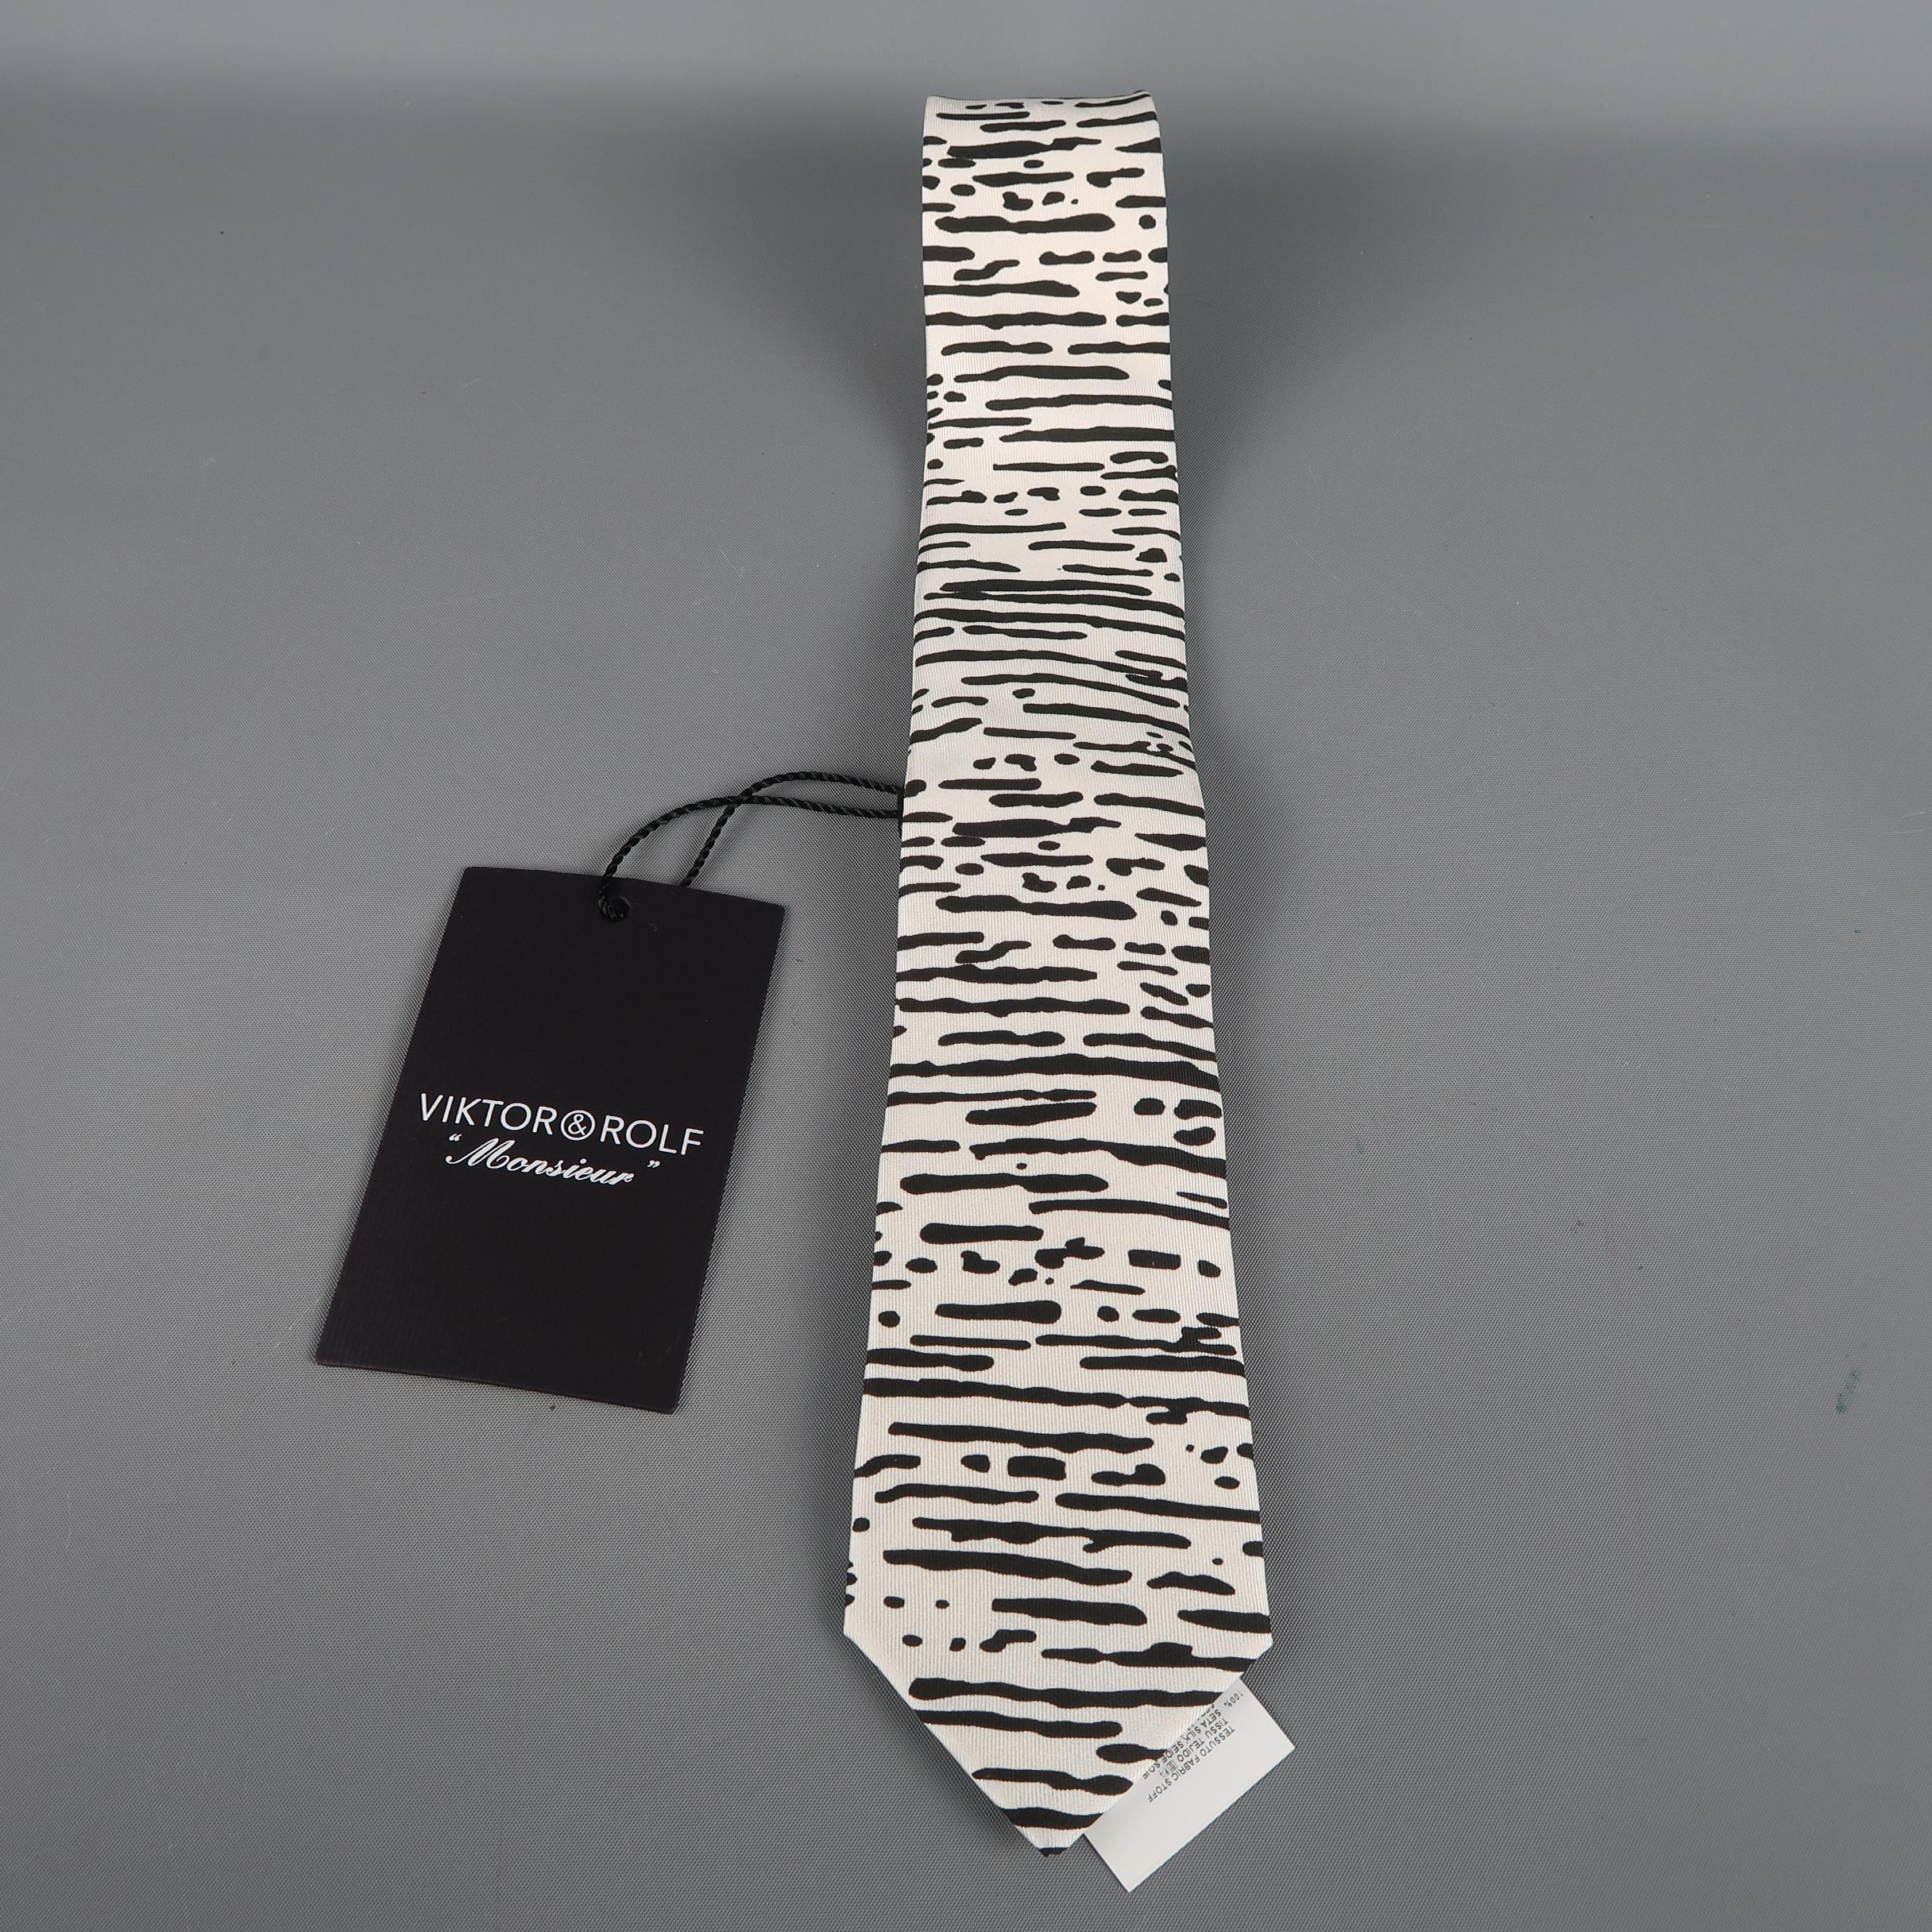 VIKTOR & ROLF tie come in black and white silk, printed. Made in Italy.
 
New with Tags.
 
Width: 3 in.